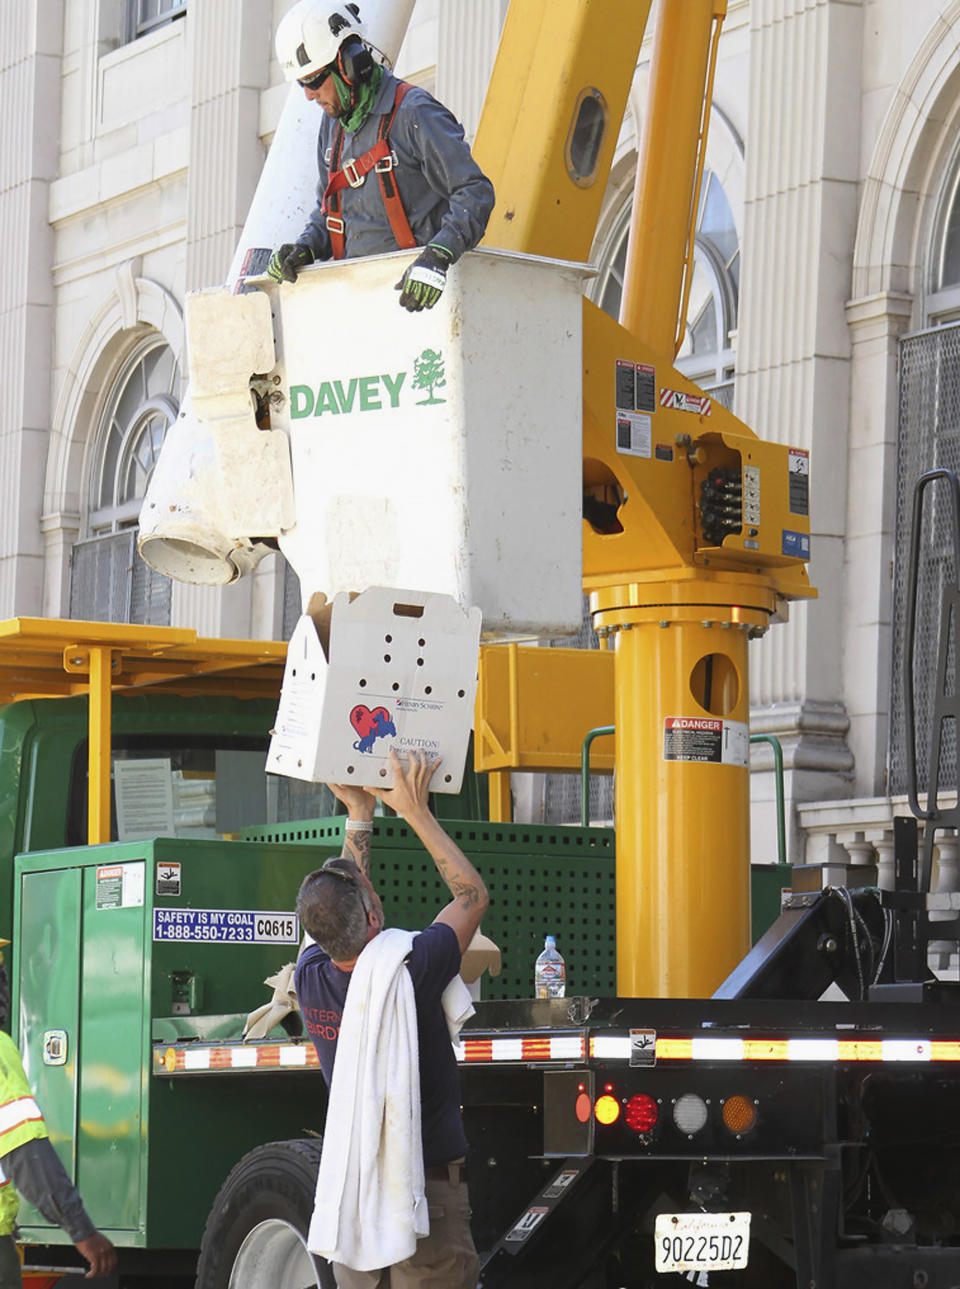 This July 11, 2019, photo released by International Bird Rescue shows a rescue team working to remove nests containing birds and eggs from a tree in Oakland, Calif. An animal rescue group is asking for help caring for baby snowy egrets and black-crowned night herons left homeless last week after a tree fell in downtown Oakland. (International Bird Rescue via AP)